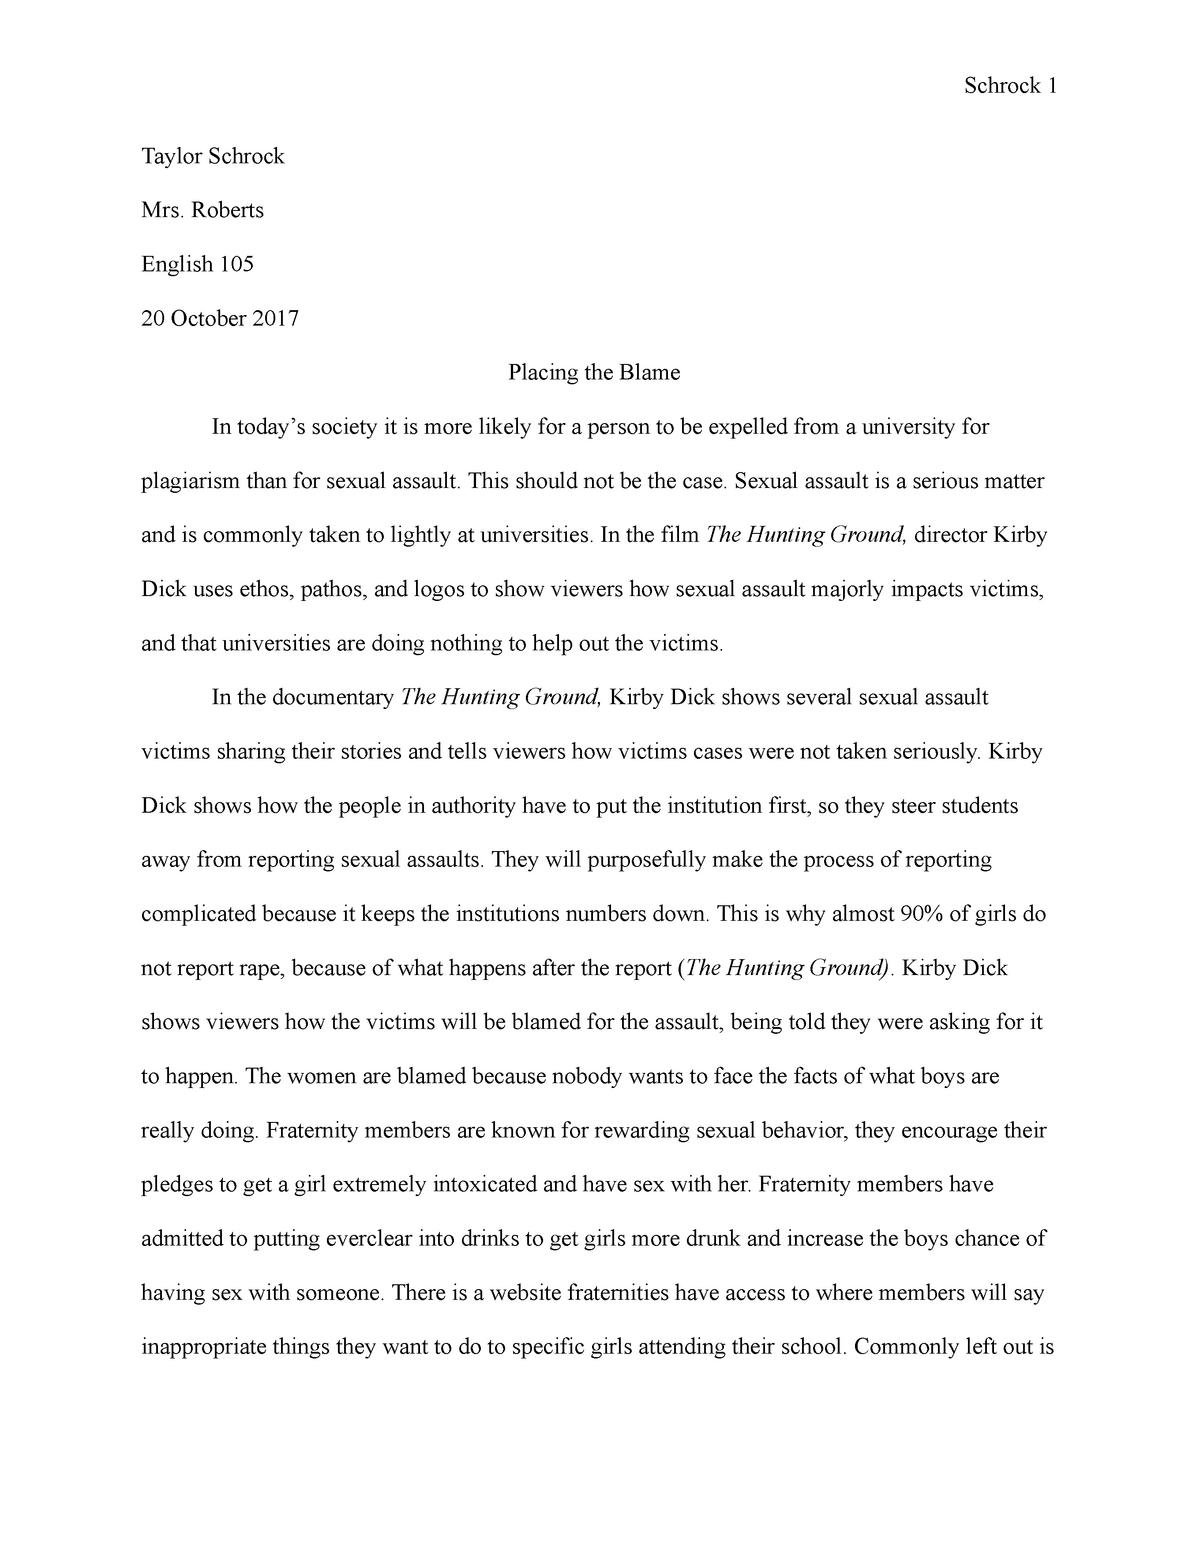 the hunting ground essay